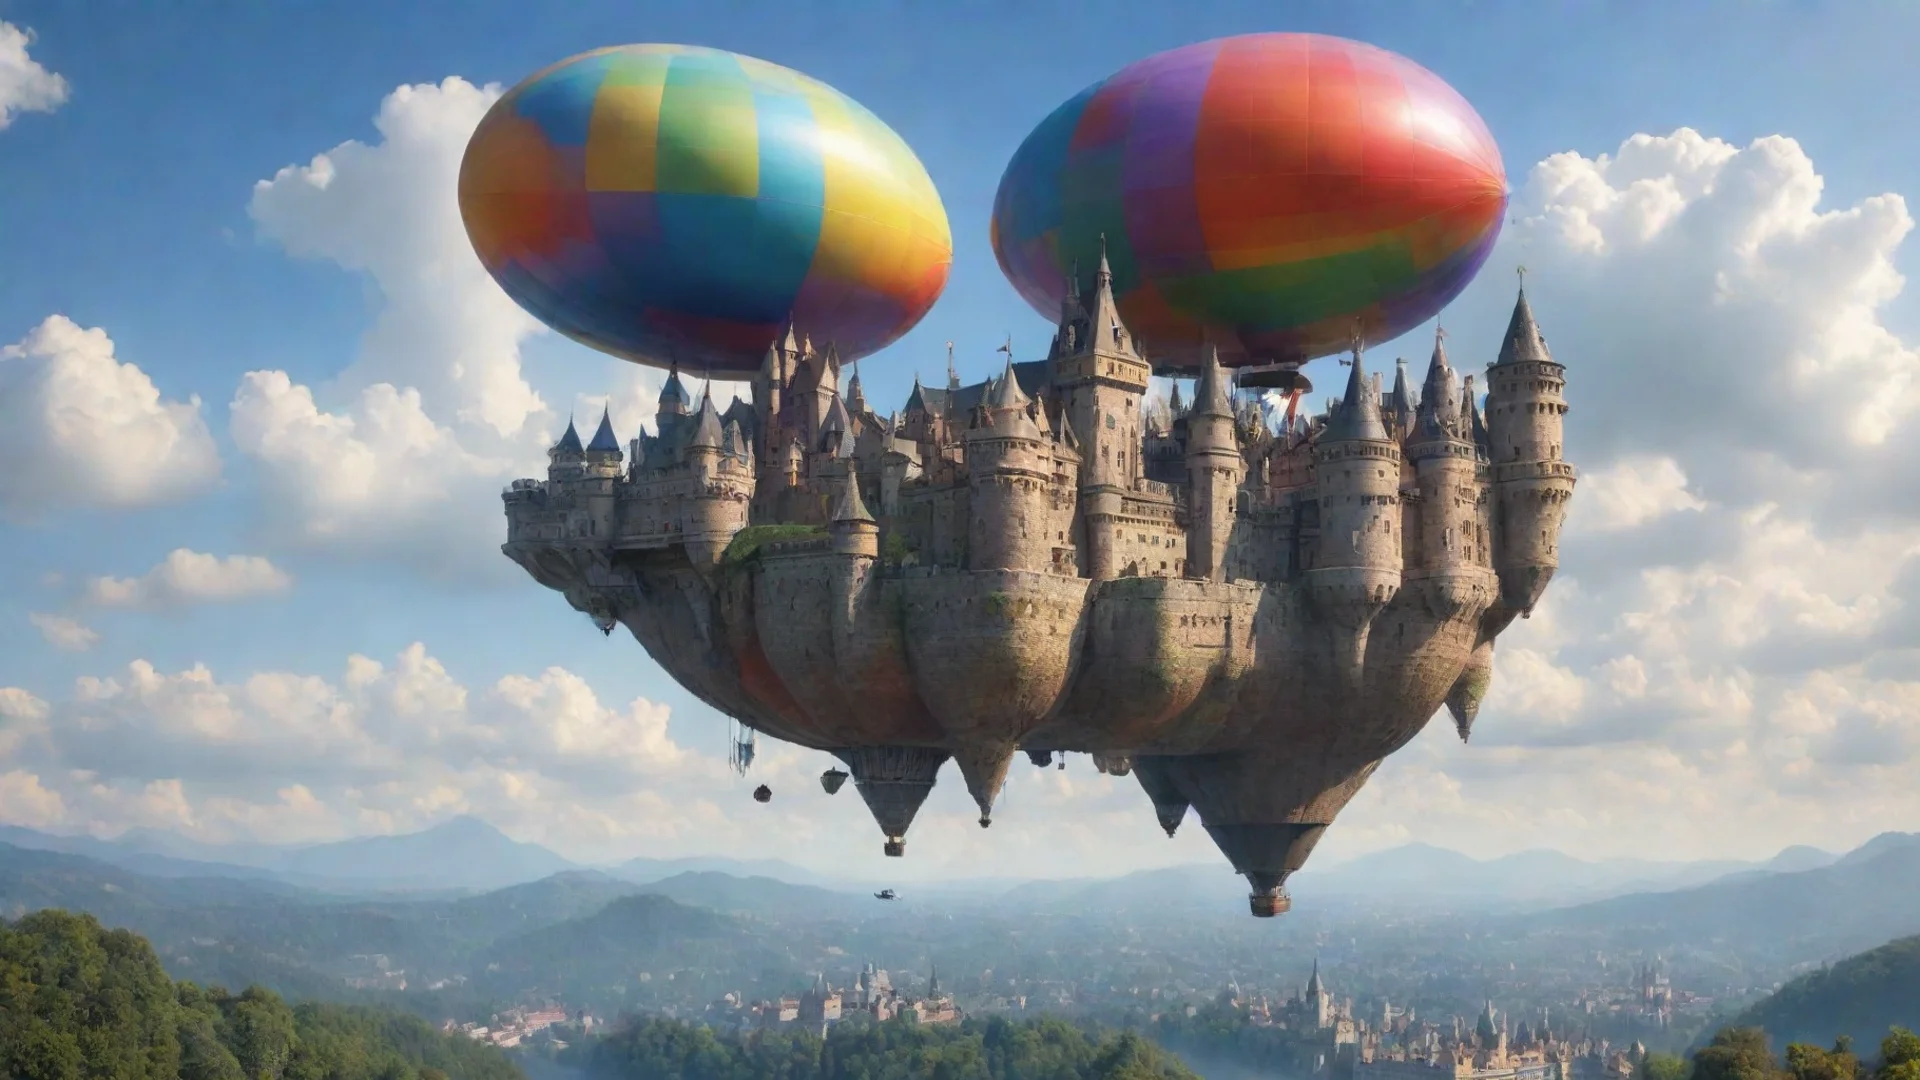 castle in sky amazing awesome architectural masterpiece wow hd colorful world floating blimp wide